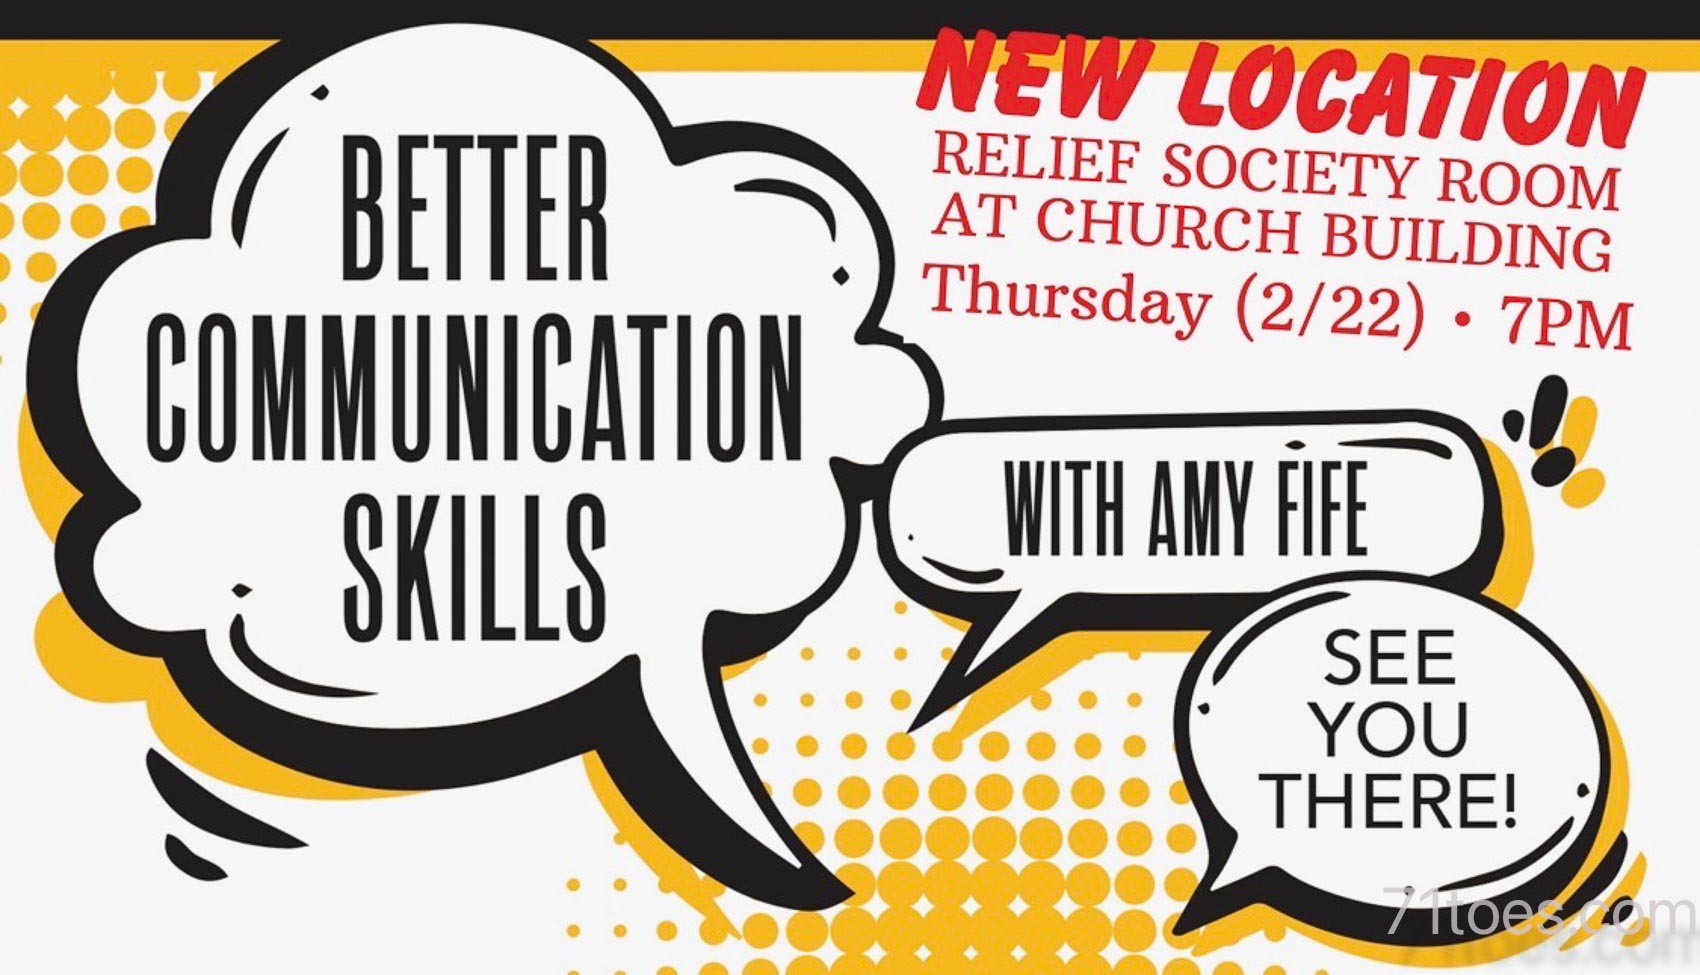 invitation to our church "better communication" night